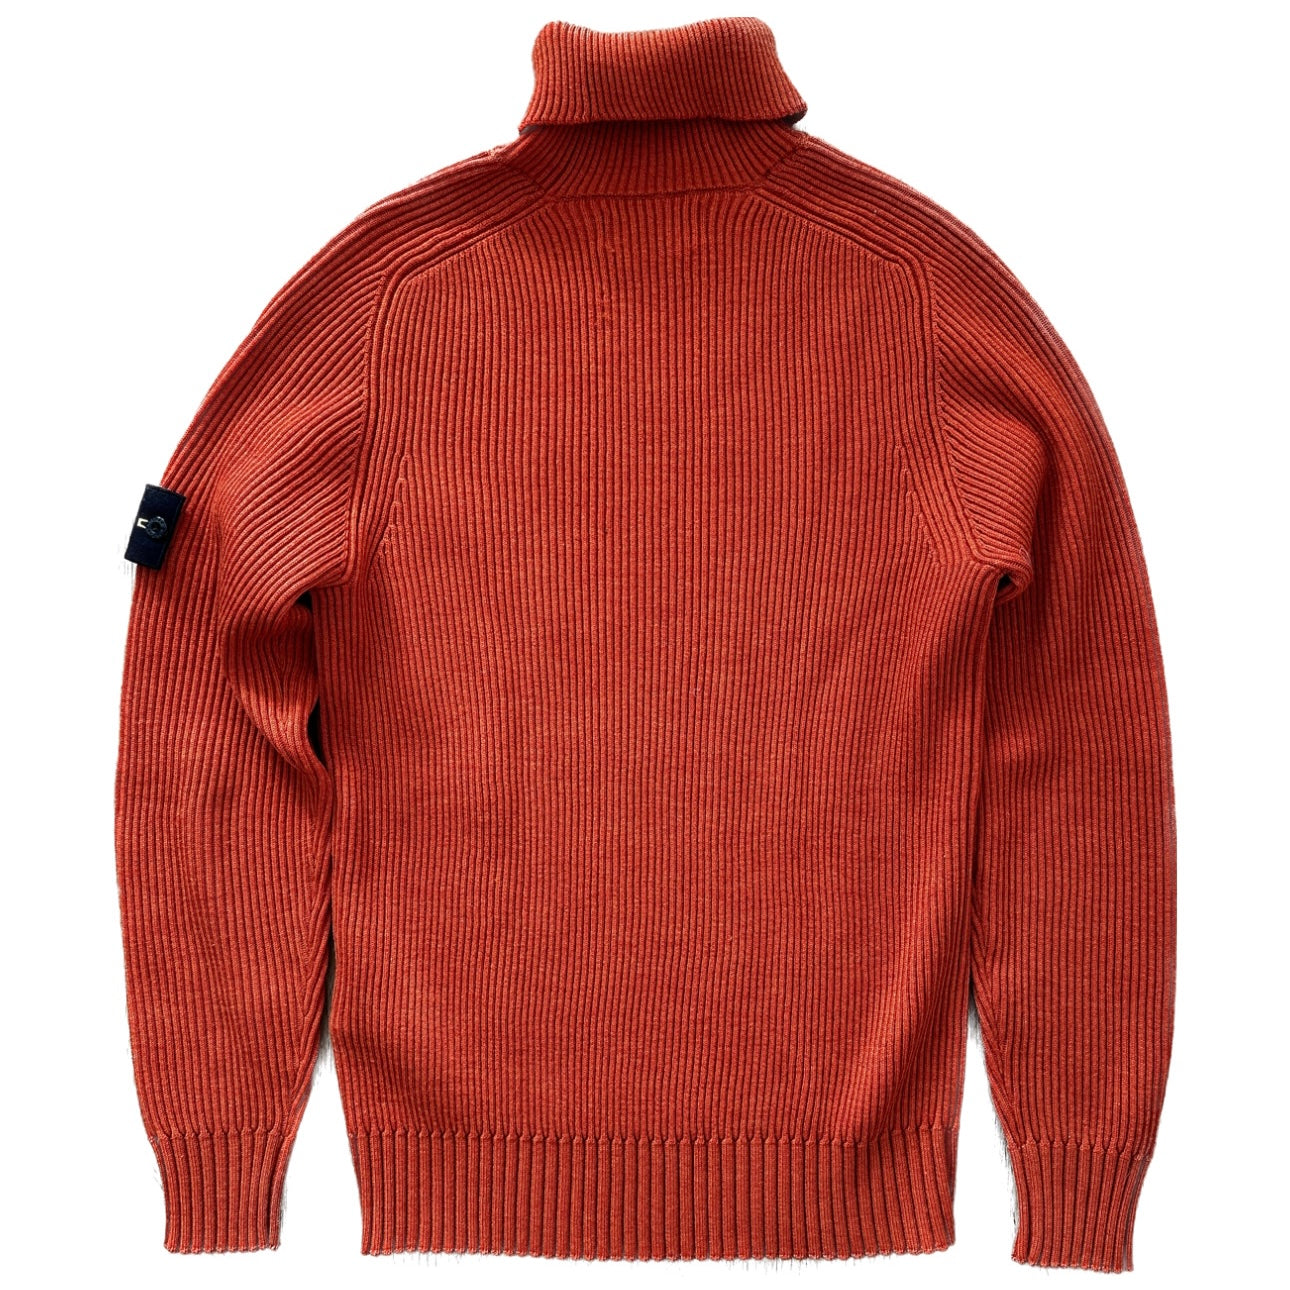 Stone Island 2015 Turtleneck Knit Sweater - L - Made in Italy